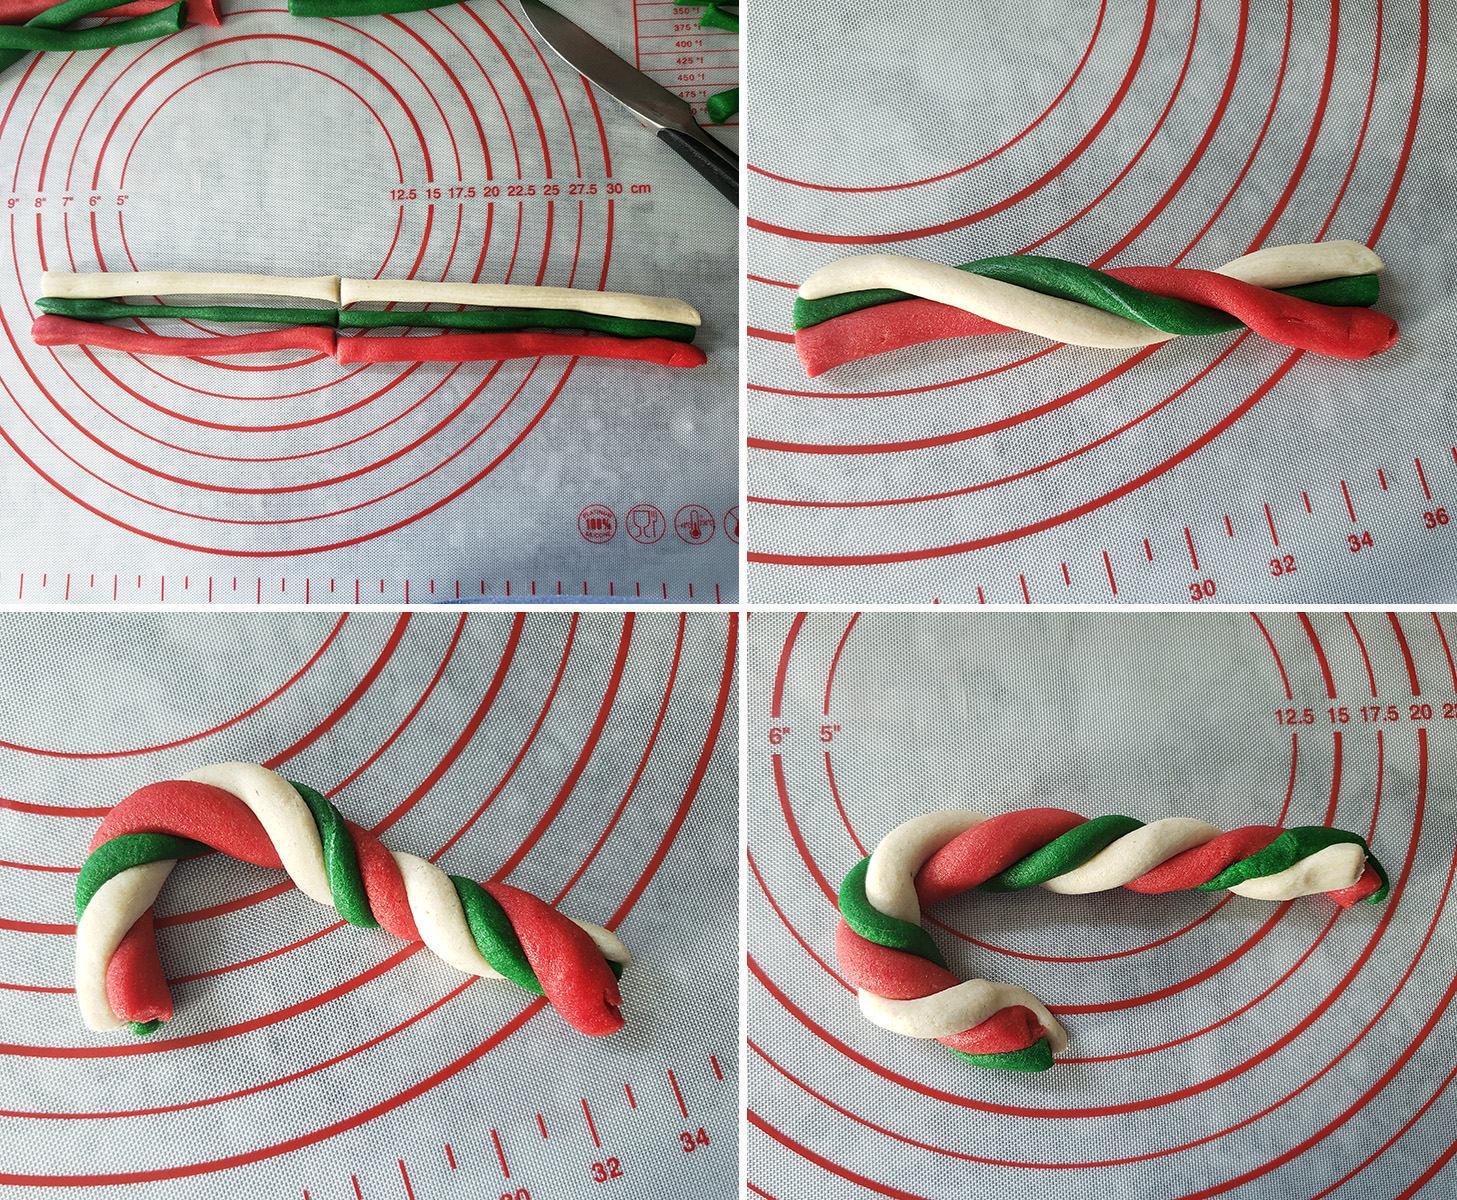 a 4 photo collage demonstrating the second rolling technique described.